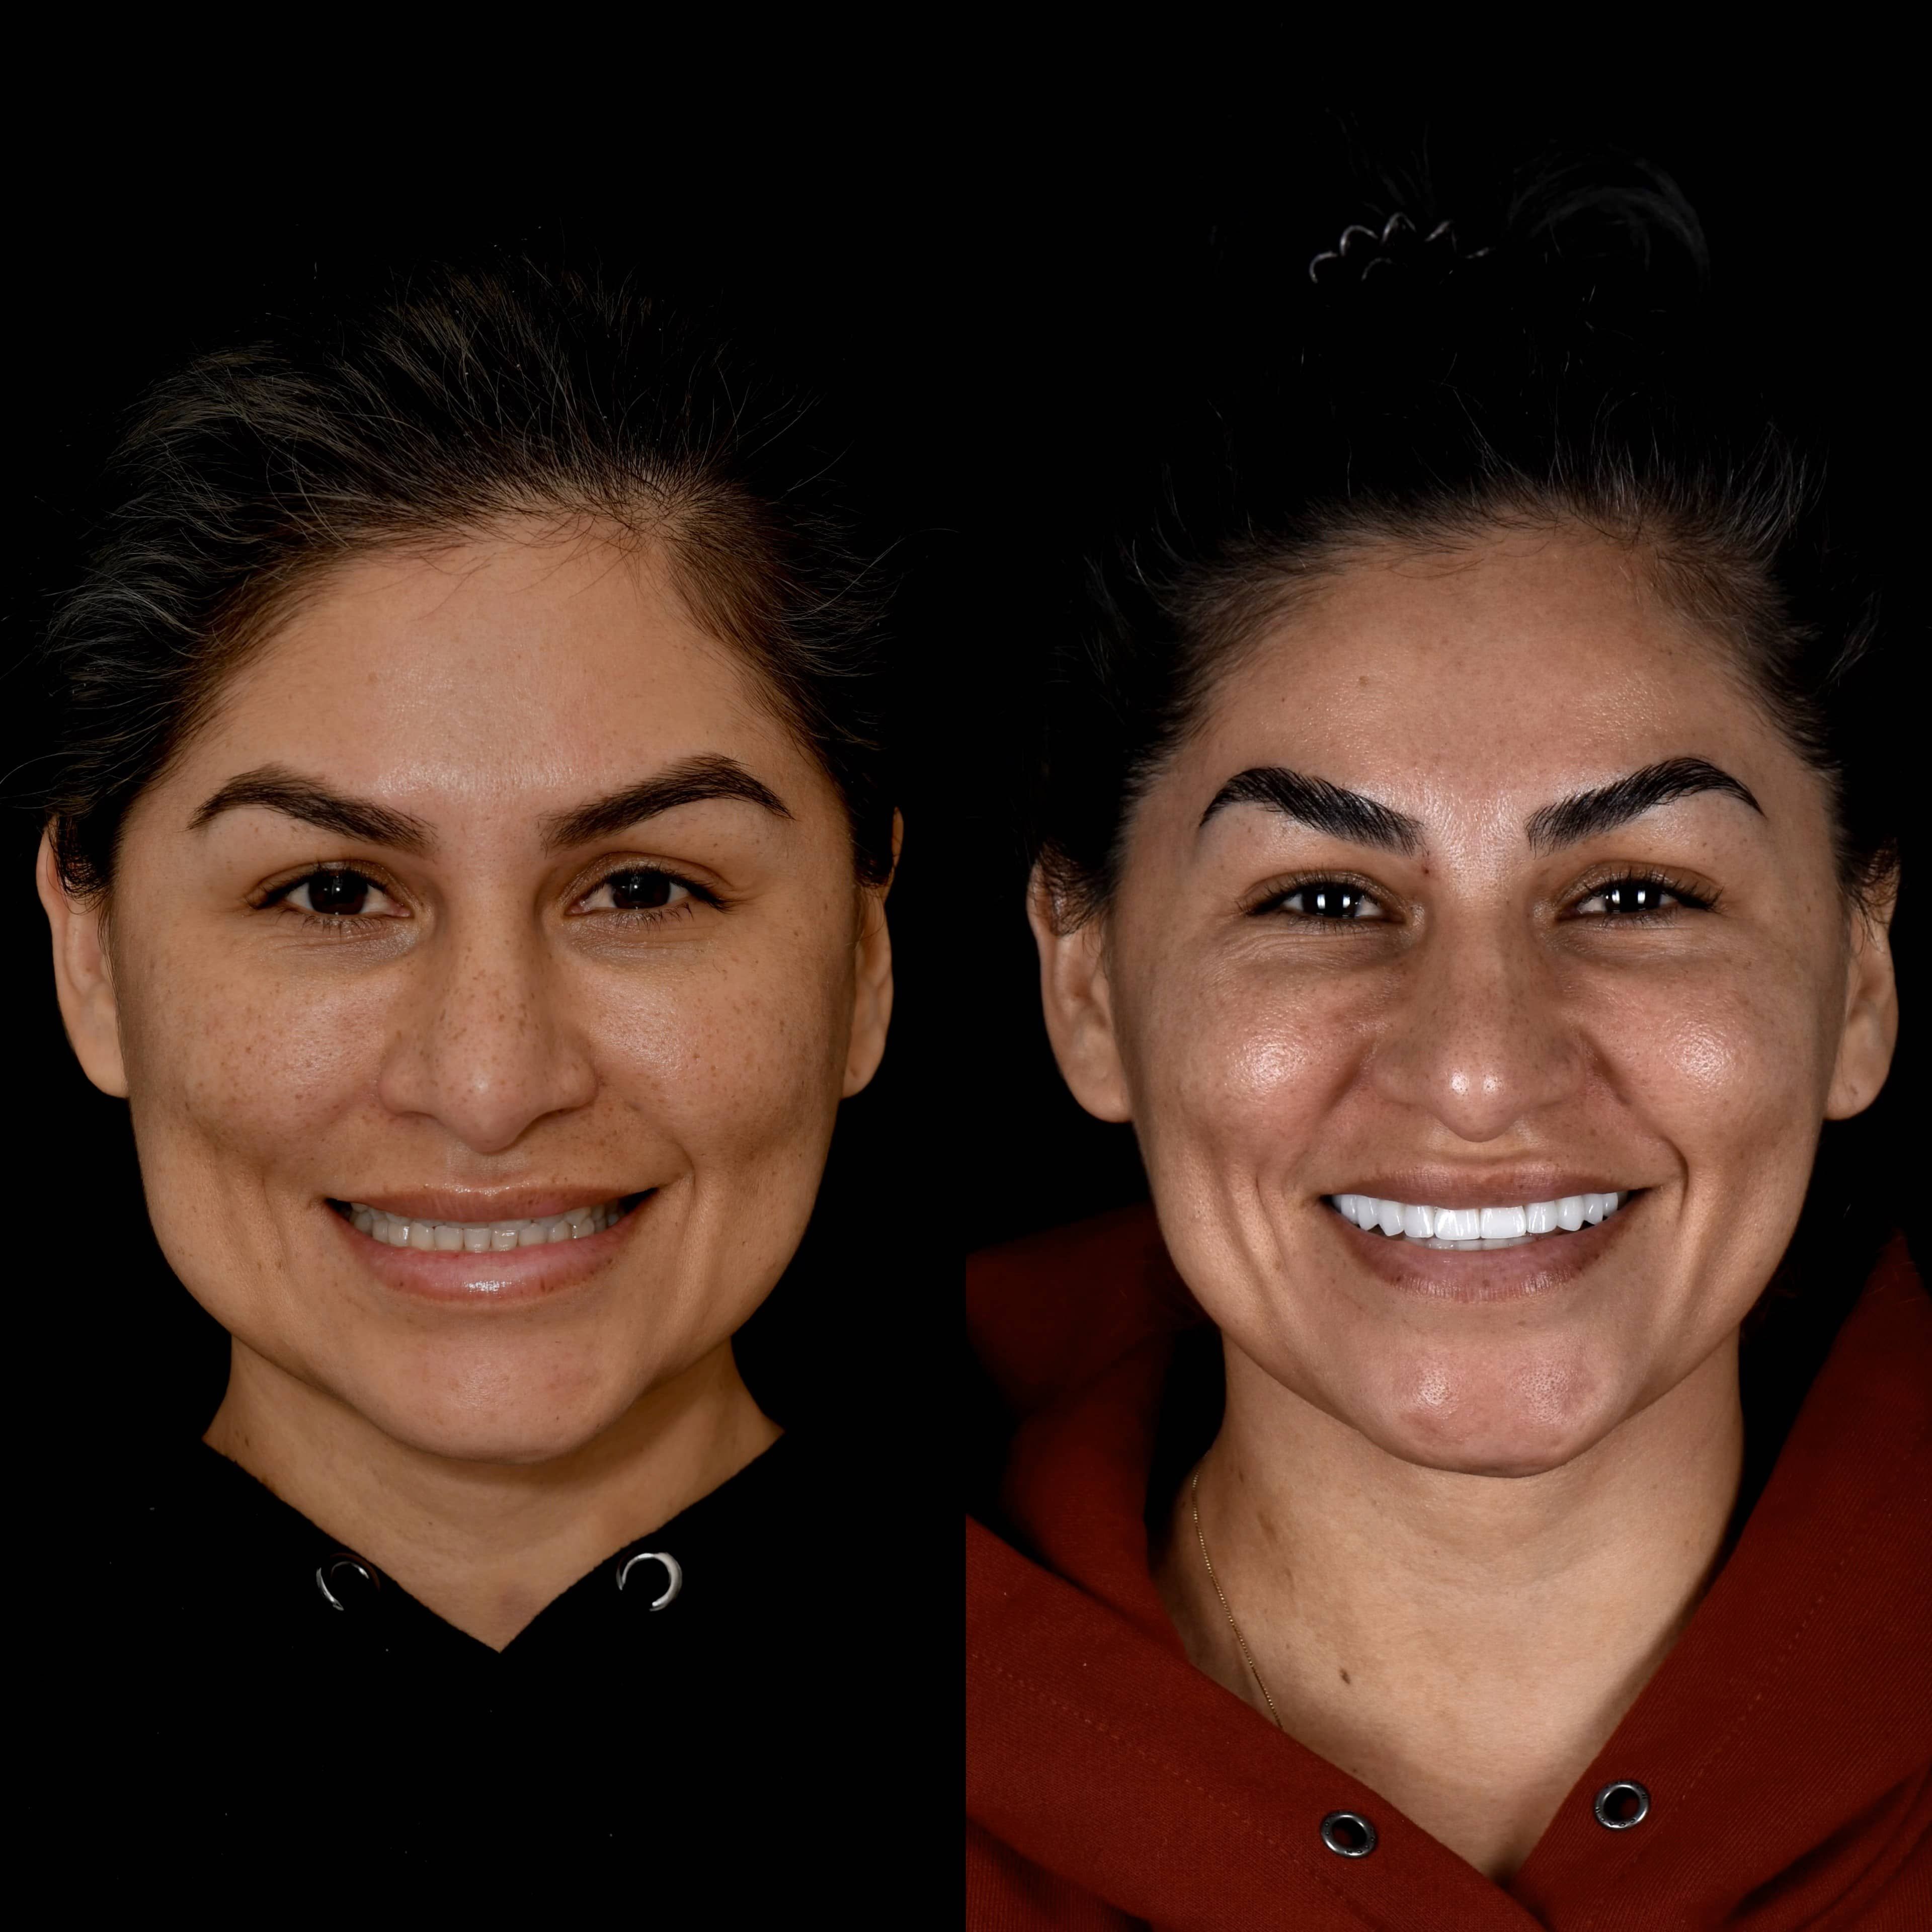 Patient consultation for veneers in a Beverly Hills dentist